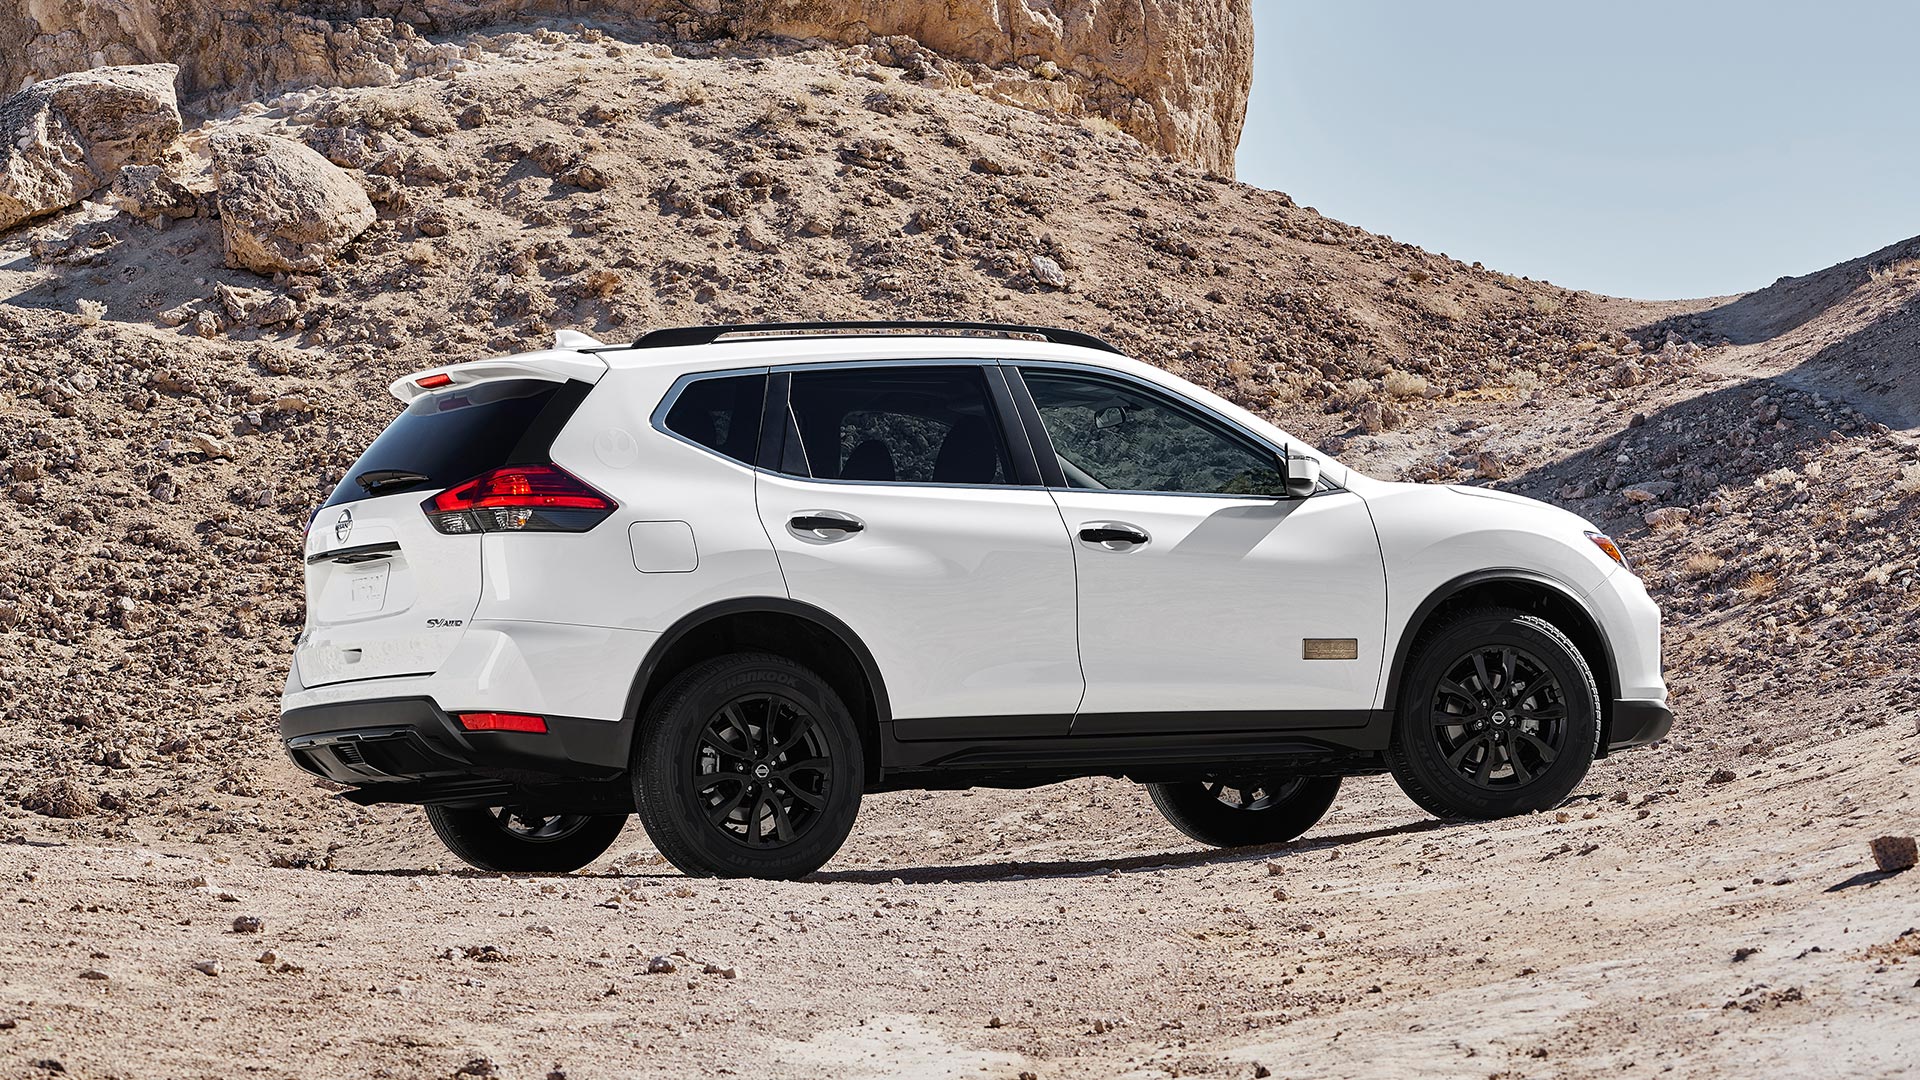 2017-nissan-rogue-one-star-wars-edition-white - Glendale Nissan